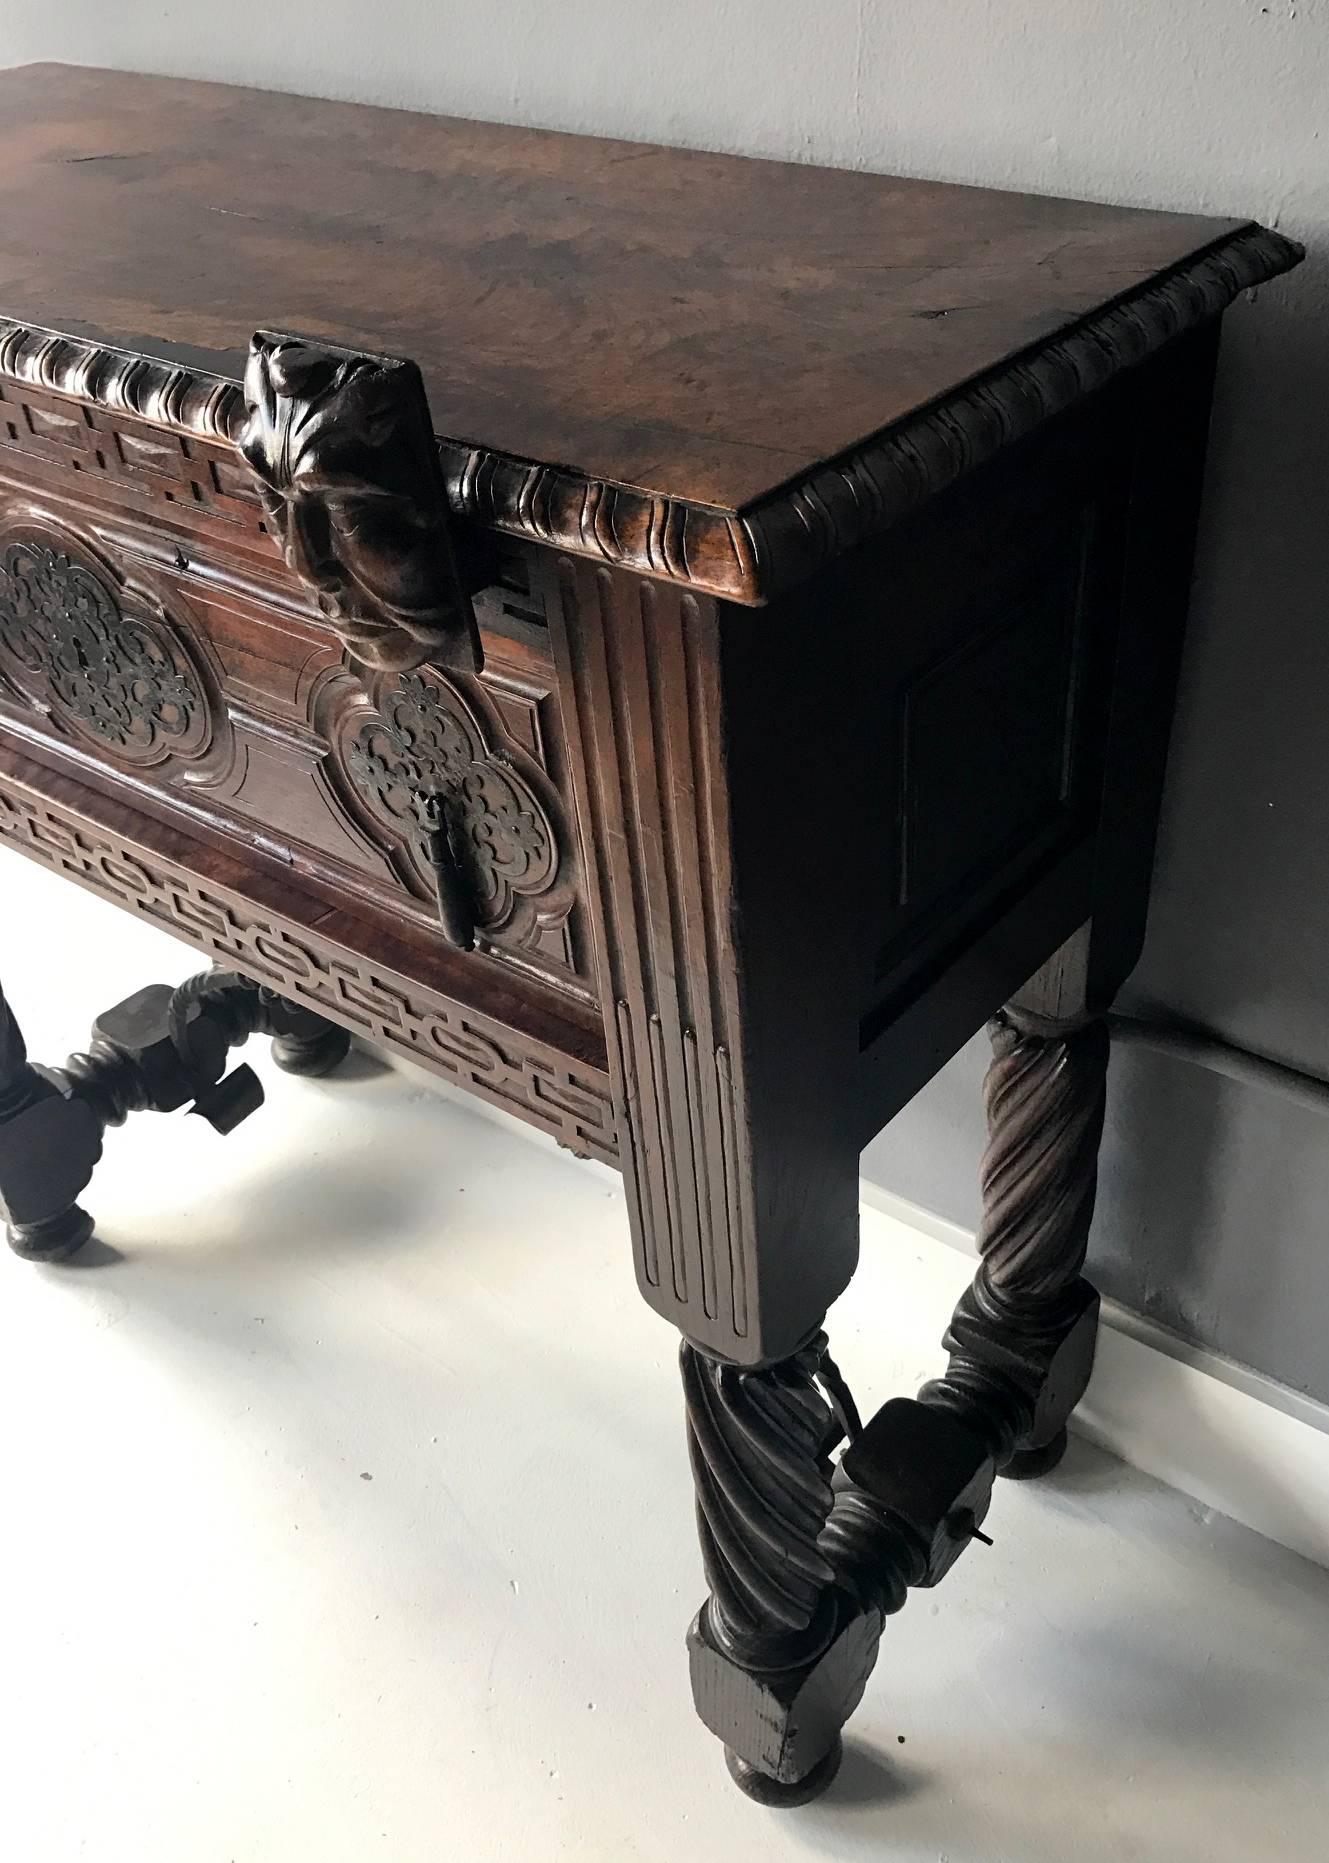 An circa 19th century Spanish Colonial console table with a drawer, likely from Mexico, was made with mahogany and walnut. The table can serve as a small sideboard but was likely originally used as a supporting cabinet/pedestal for a papelera or